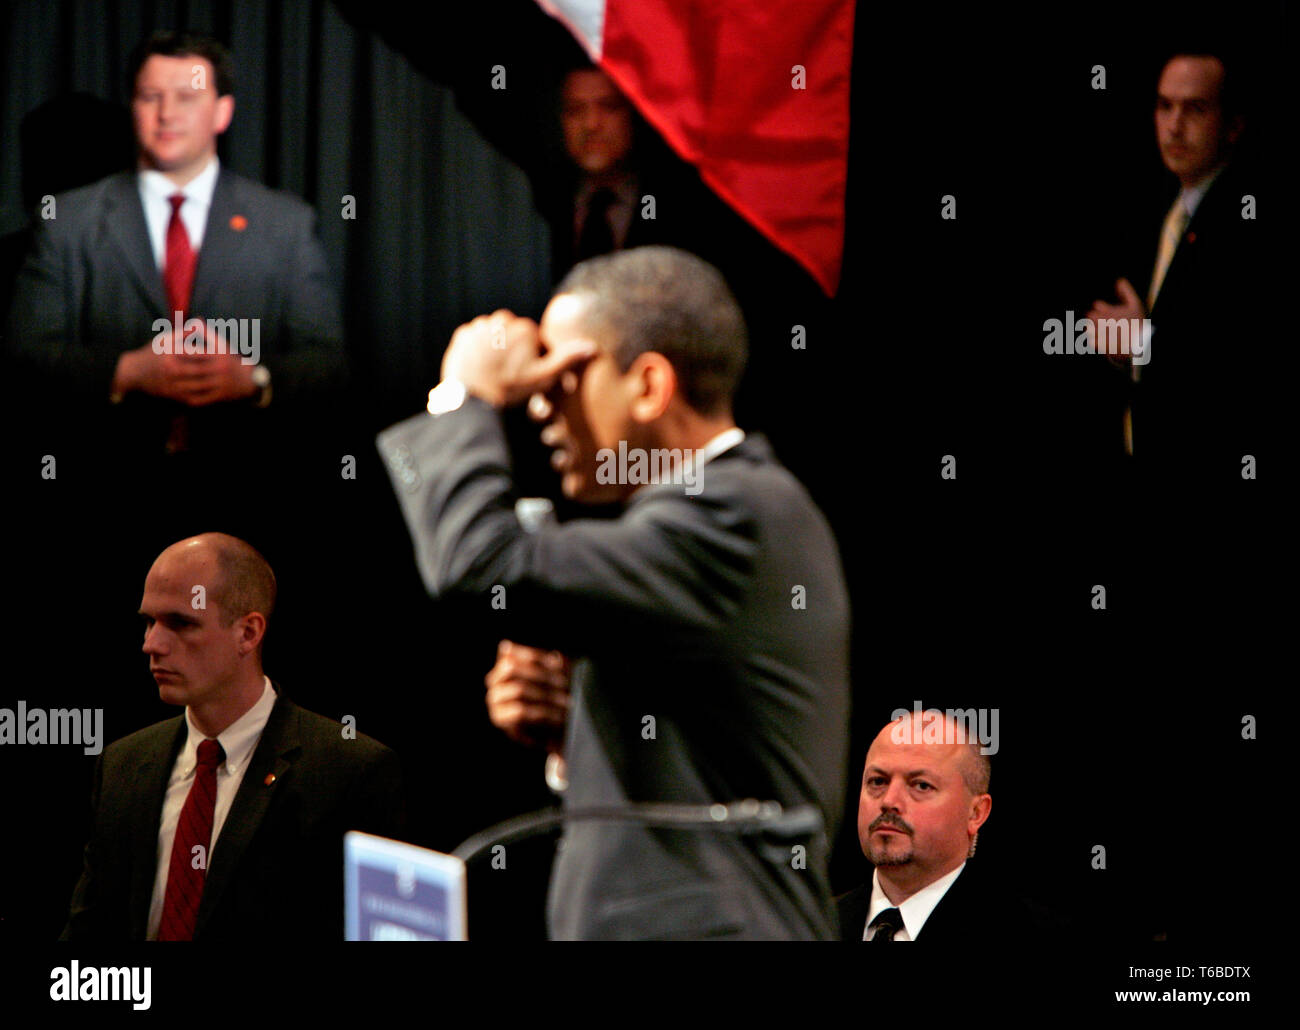 Presidential Hopeful Barack Obama (D) speaking at a townhall meeting in Parma Heights. Stock Photo